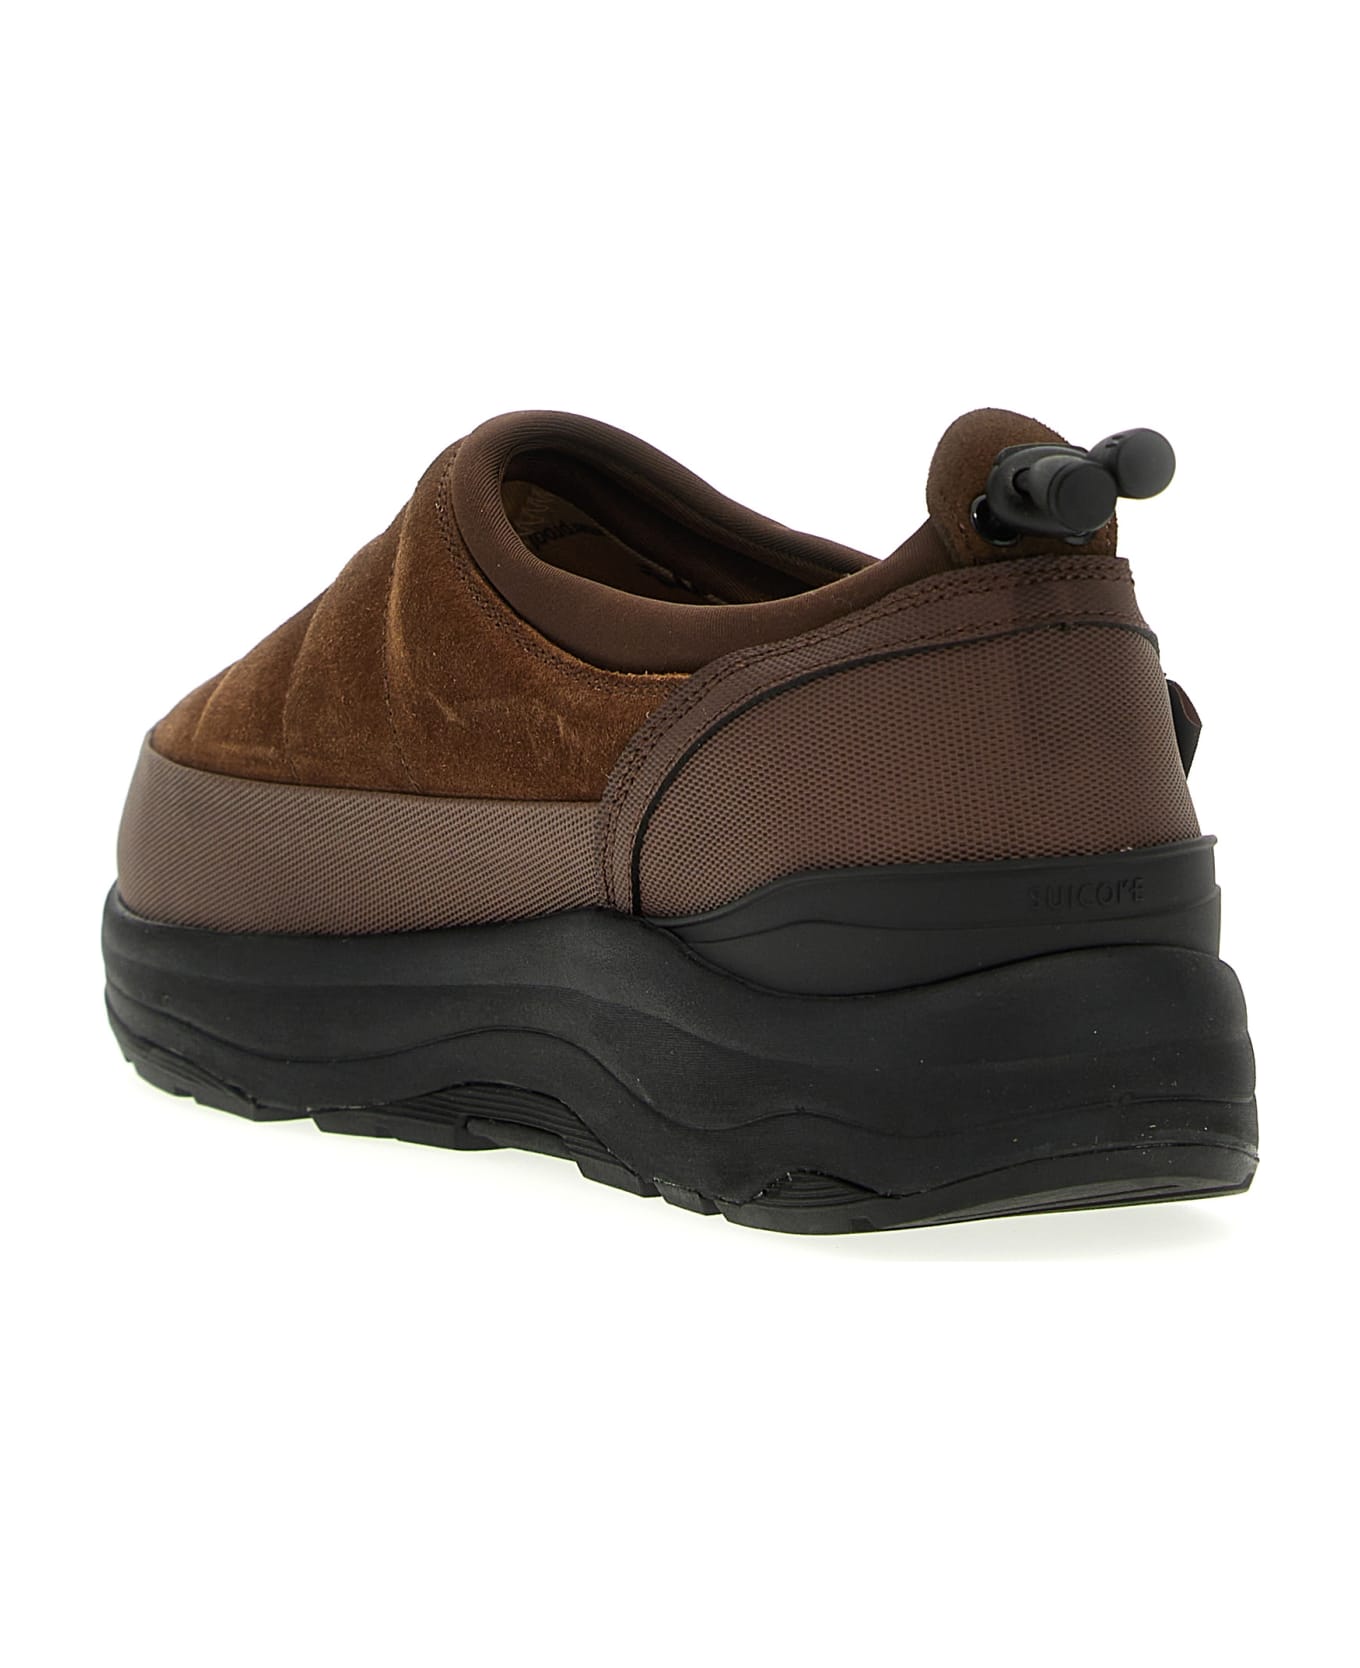 SUICOKE 'pepper' Shoes - Brown その他各種シューズ